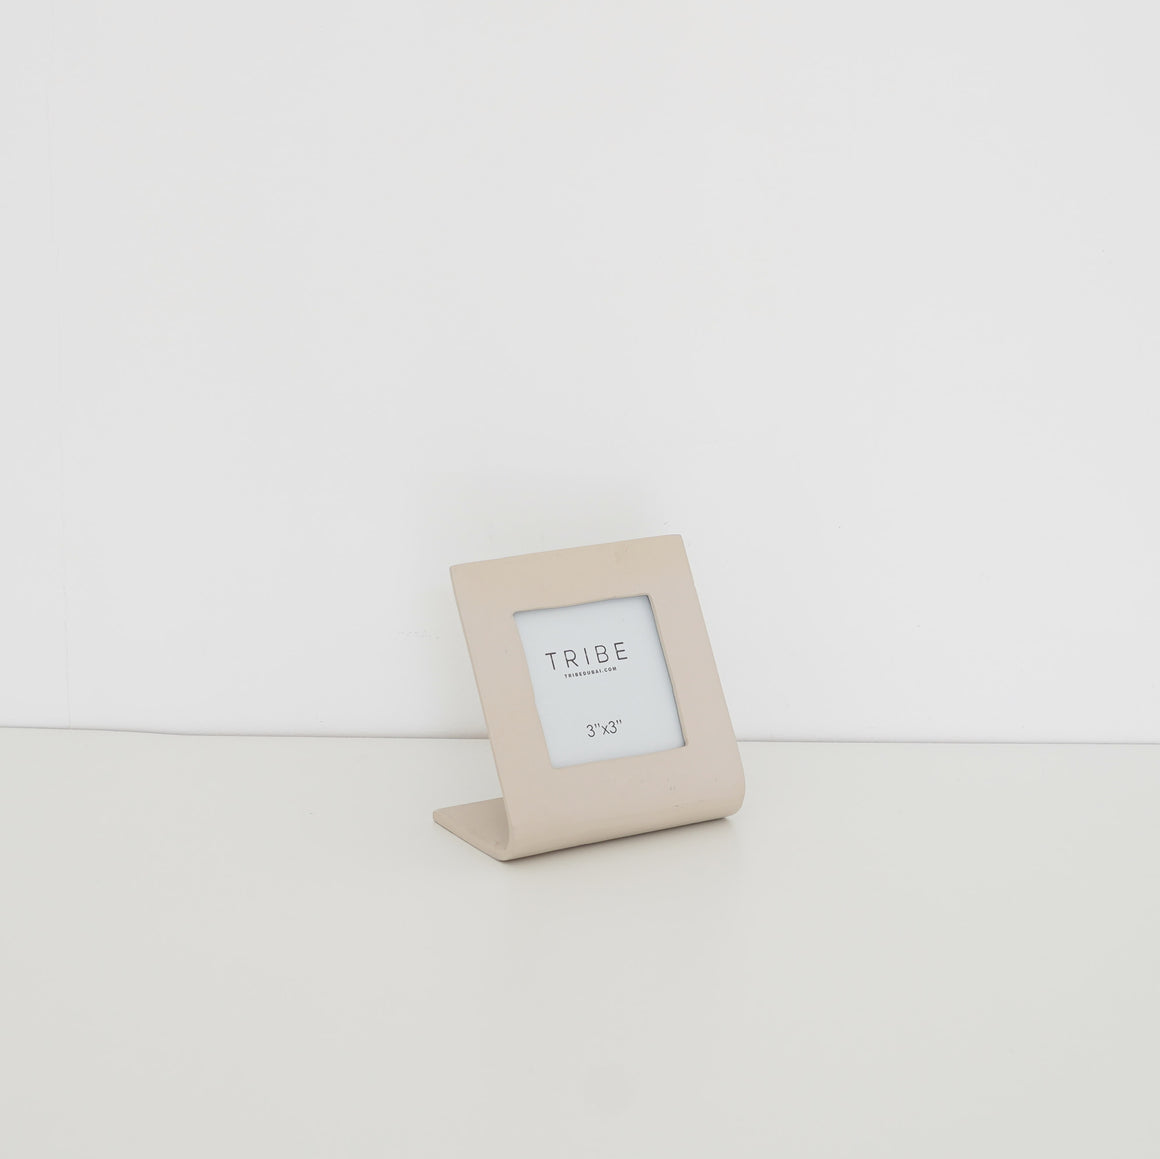 Alumi Collection - Lily Photo Frame